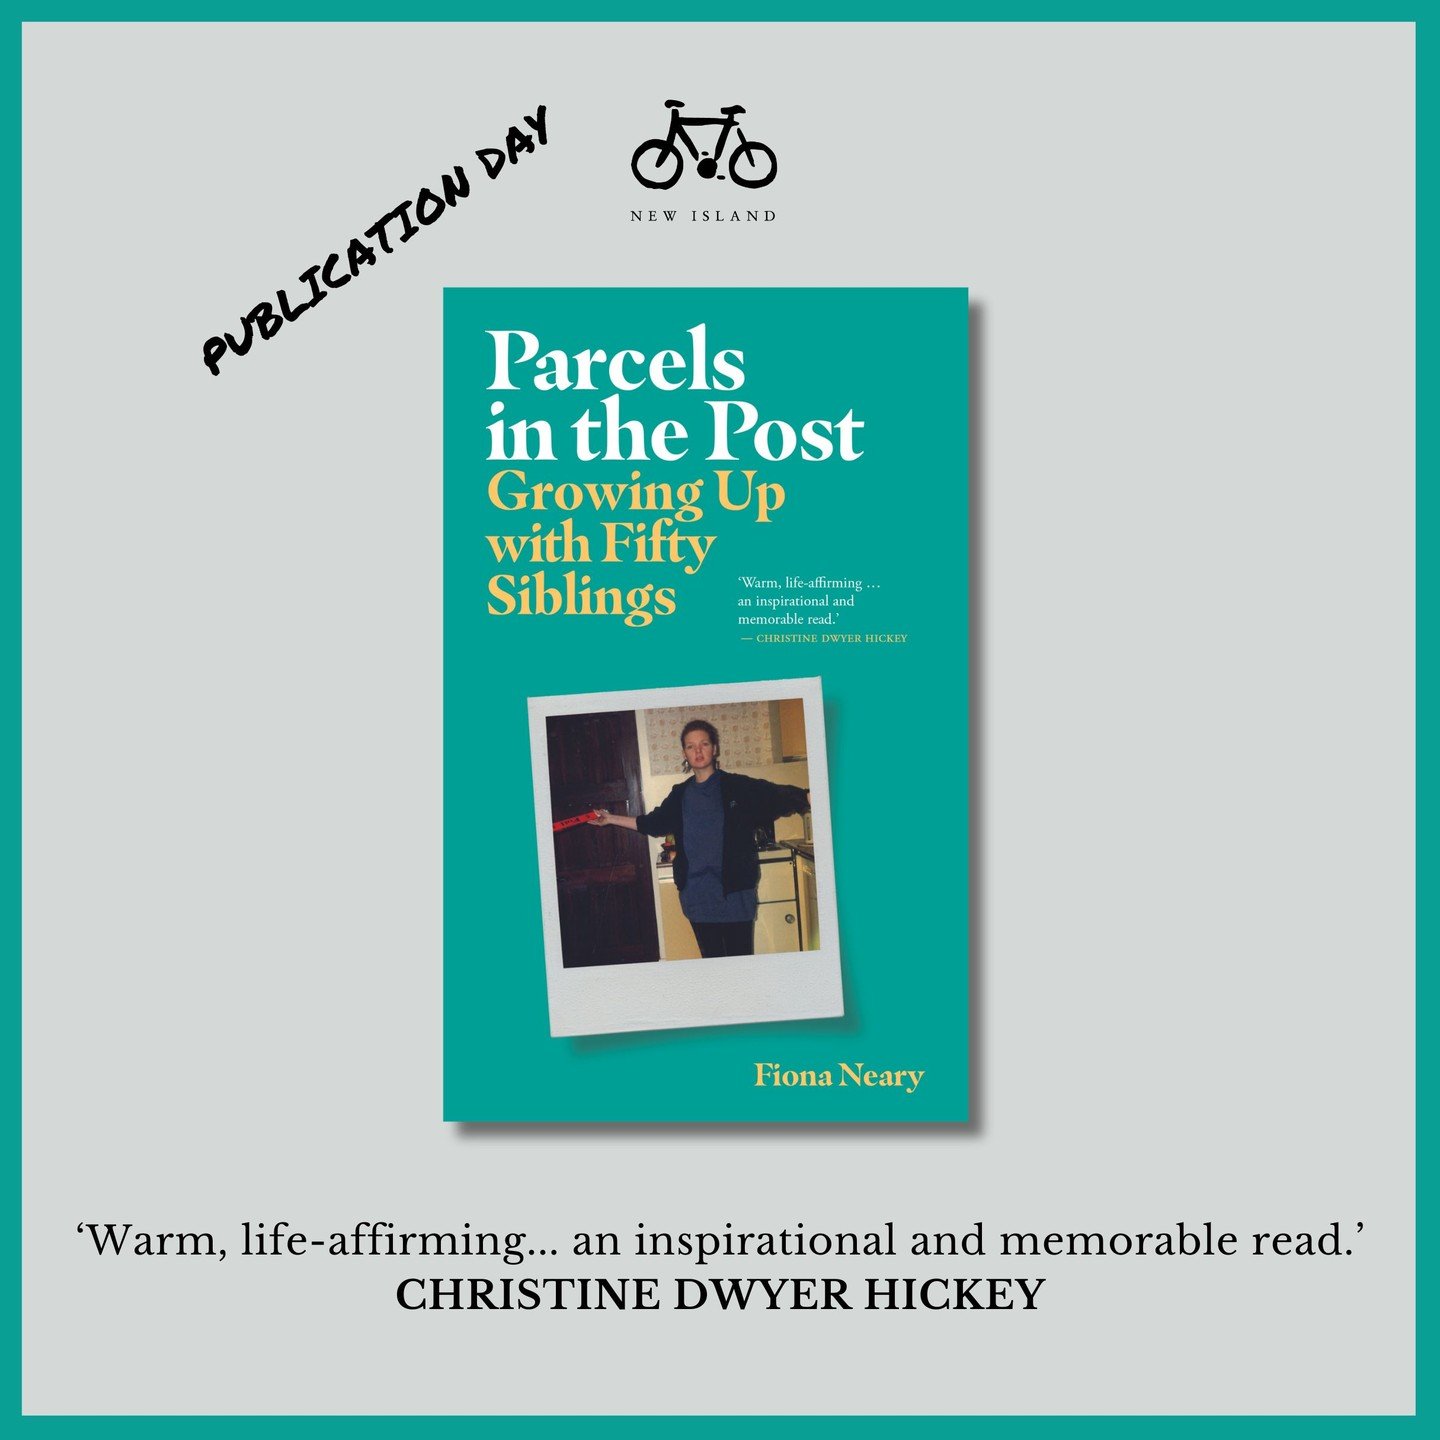 It's here! Parcels in the Post by Fiona Neary is both a memoir of a loving household and snapshot of the fostering system in Ireland, from someone at the very heart of it all. Filled with pathos and humour, this book is a joy to behold! #PublicationD